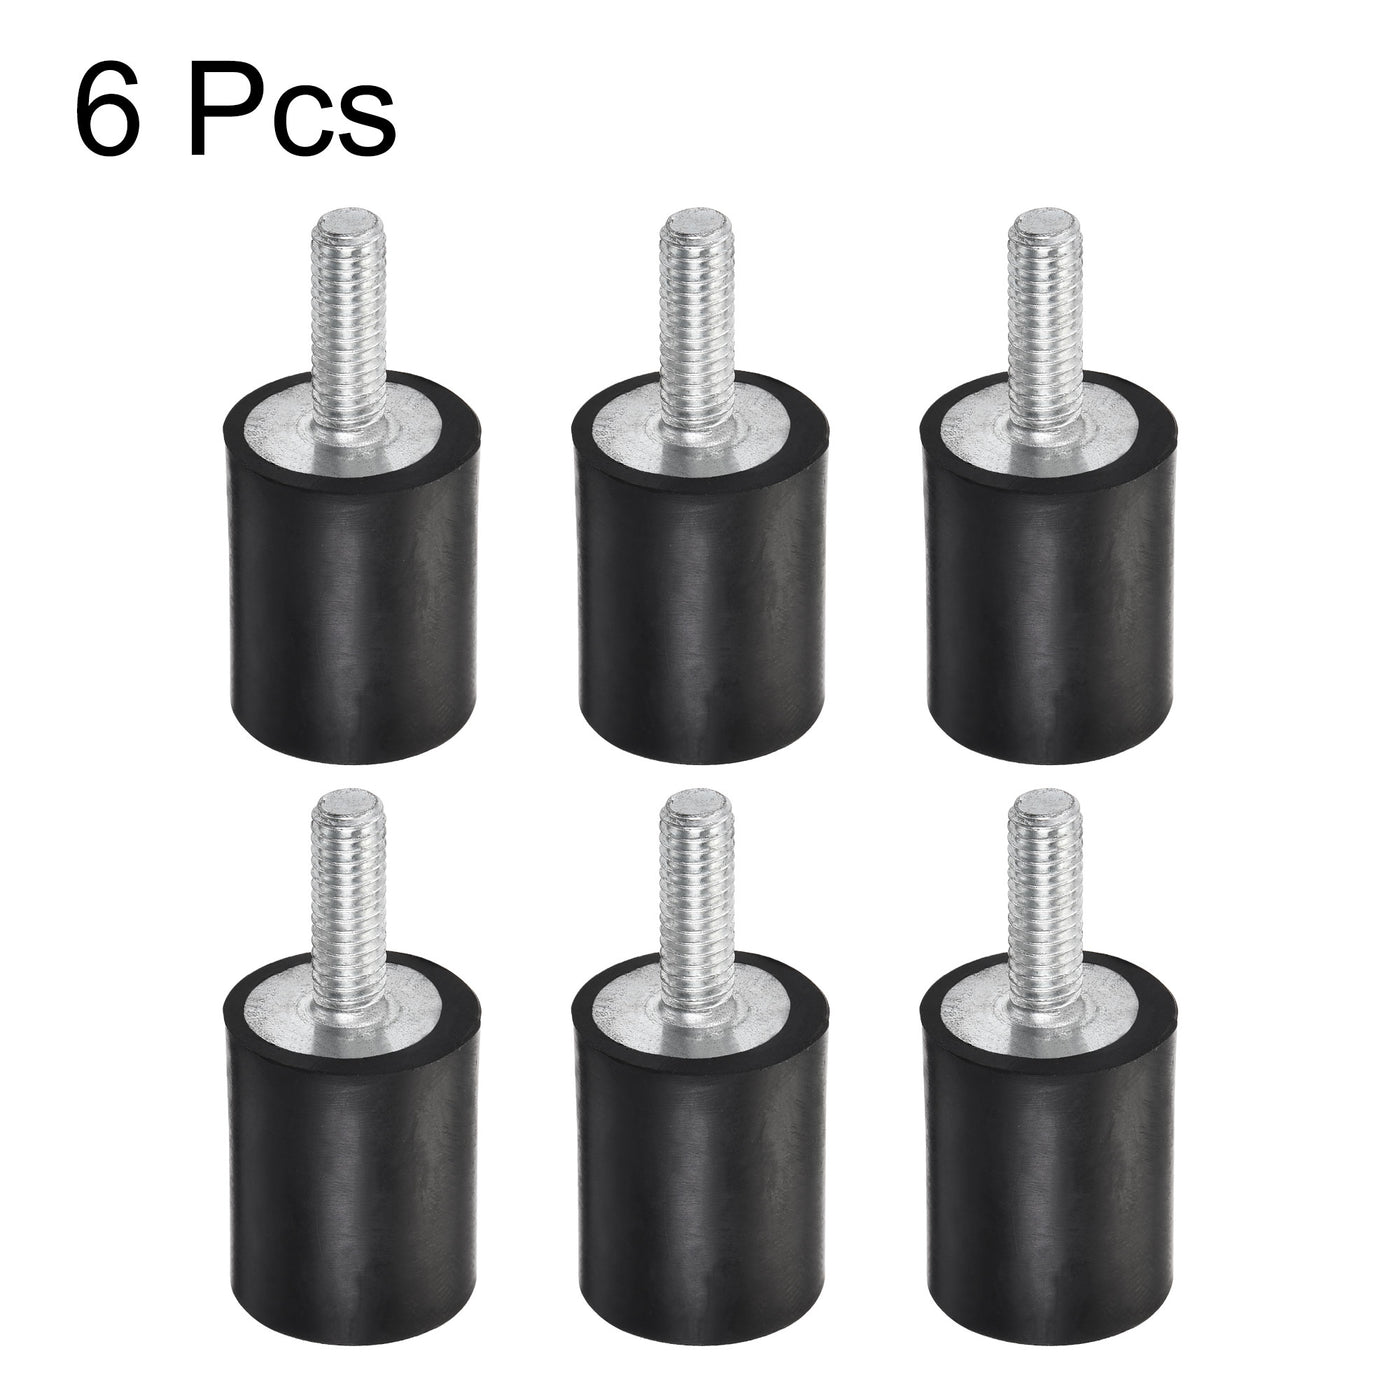 uxcell Uxcell M6 Rubber Mounts, 6pcs Male Thread Shock Absorber, D20mmxH25mm